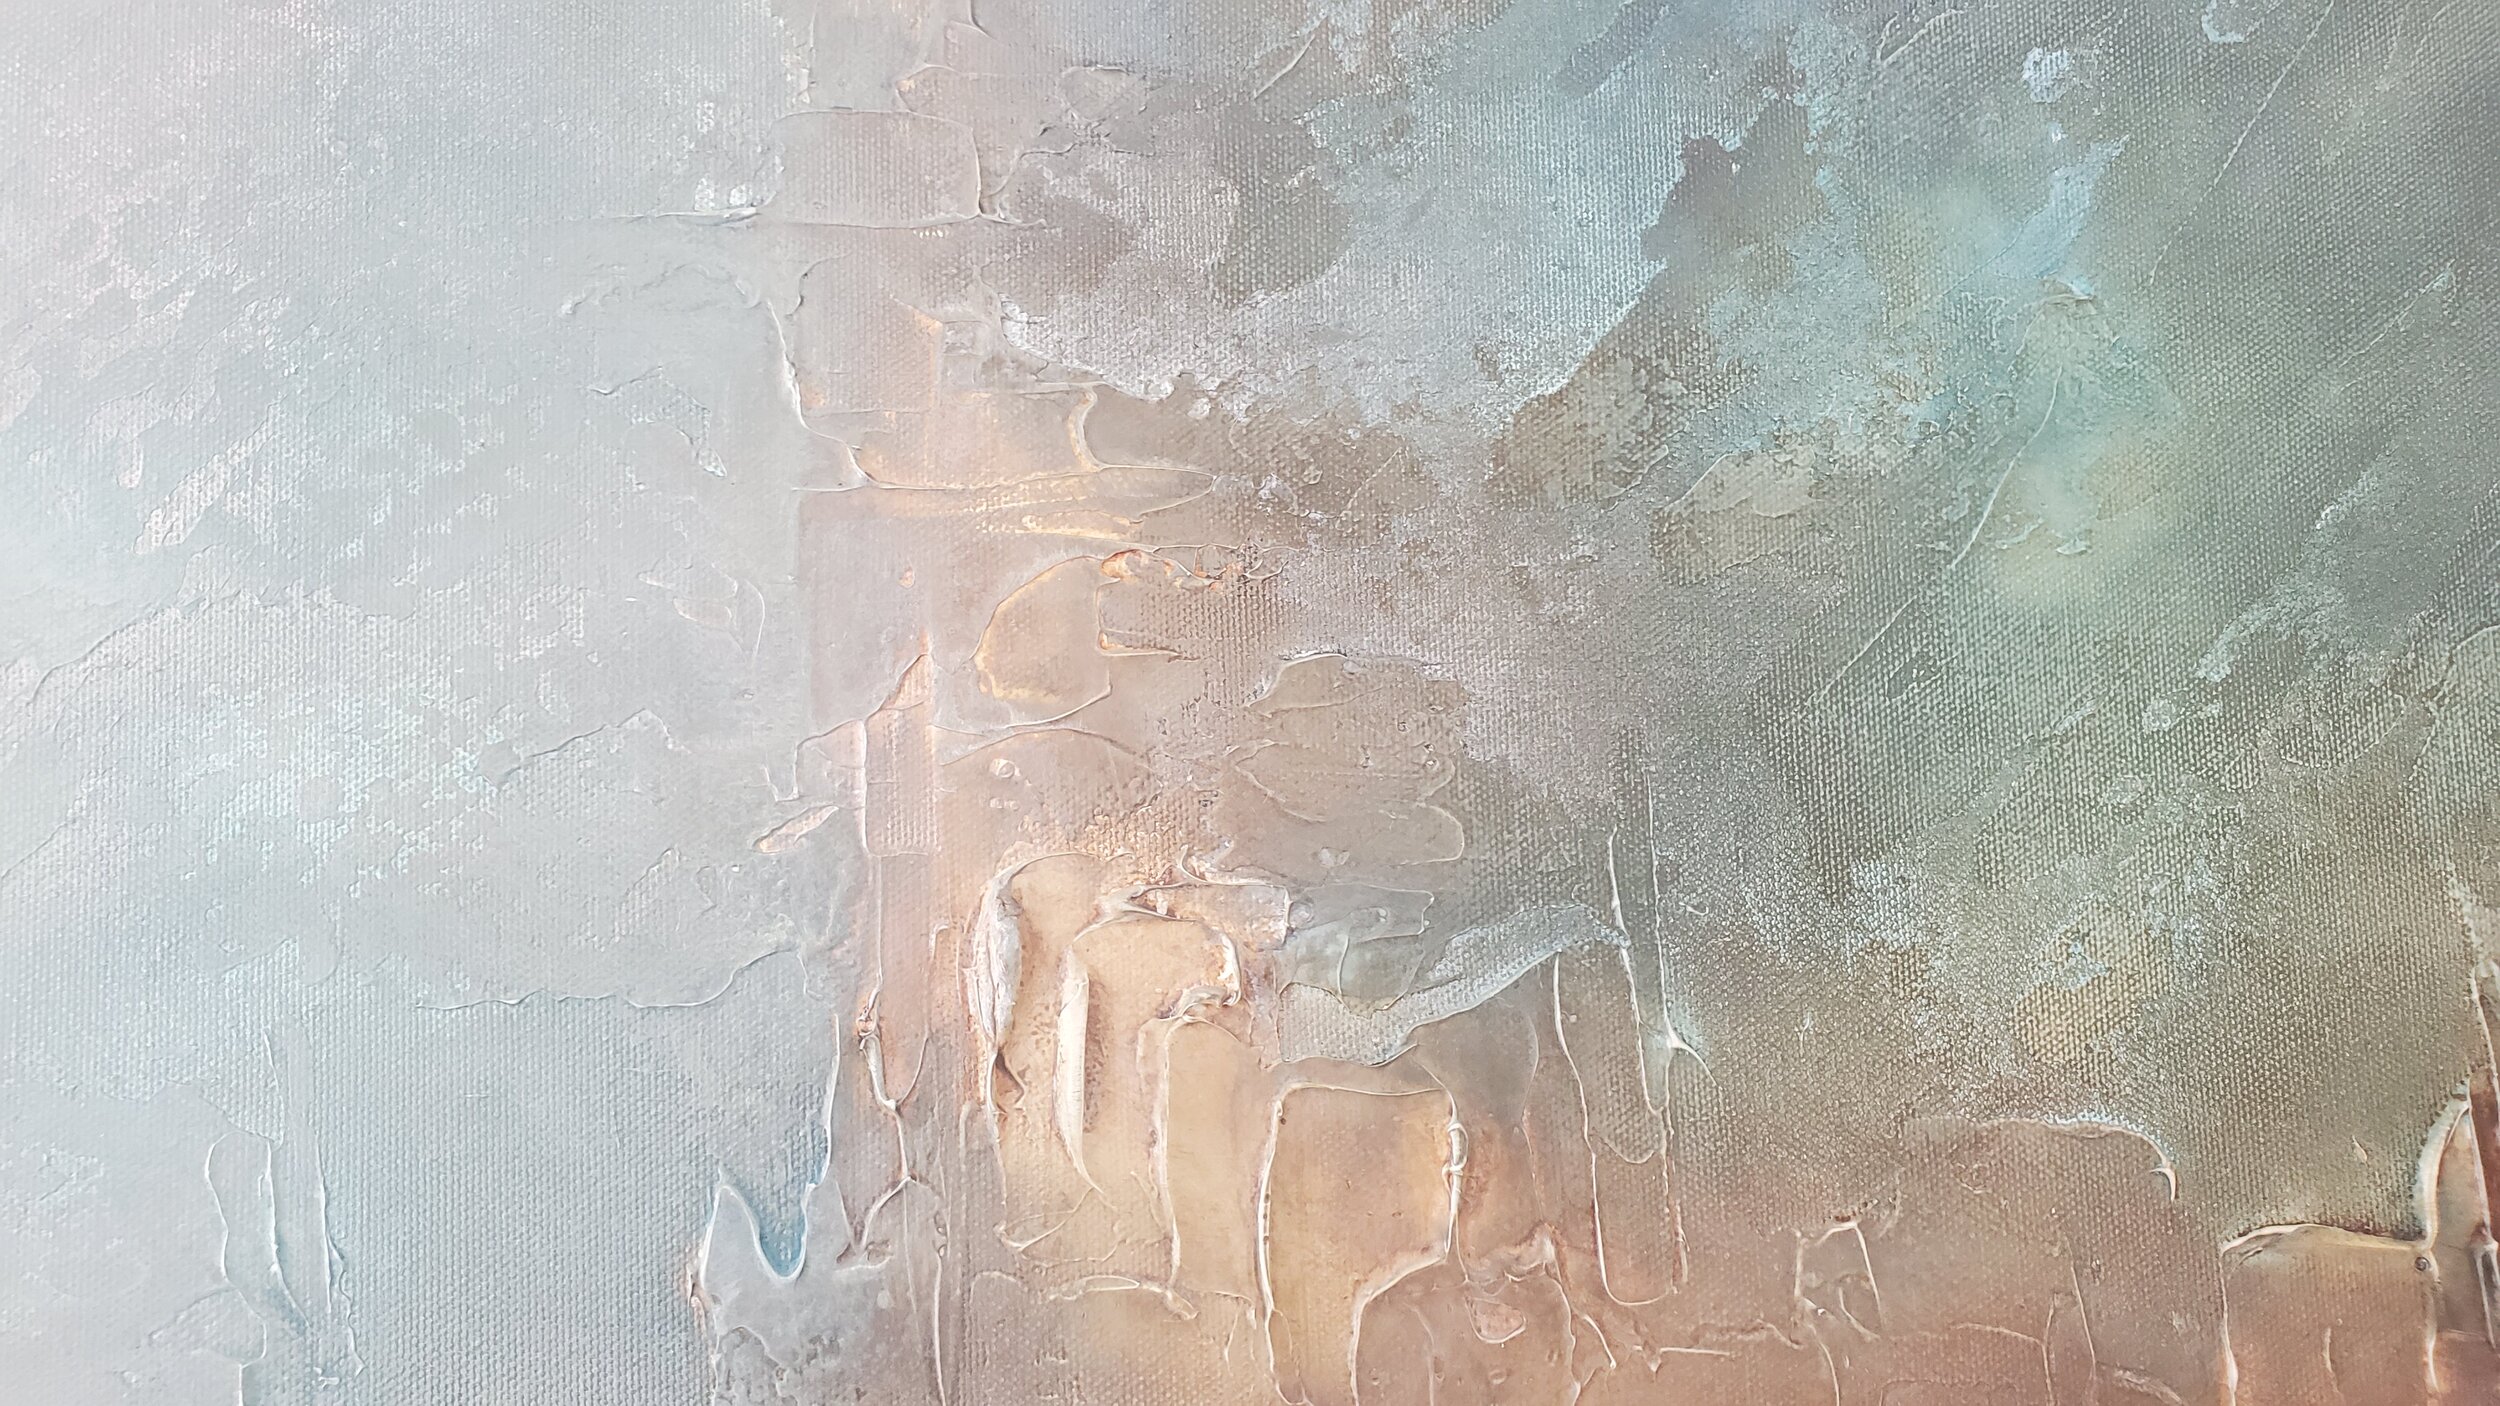  Painting #8 Believe- Vancouver abstract painter, Donna Giraud has eleven new available artworks for sale in her 2020 solo art exhibition titled, Lost and Found. Her large scale, abstract, textural artworks are perfect for any interior design aesthet